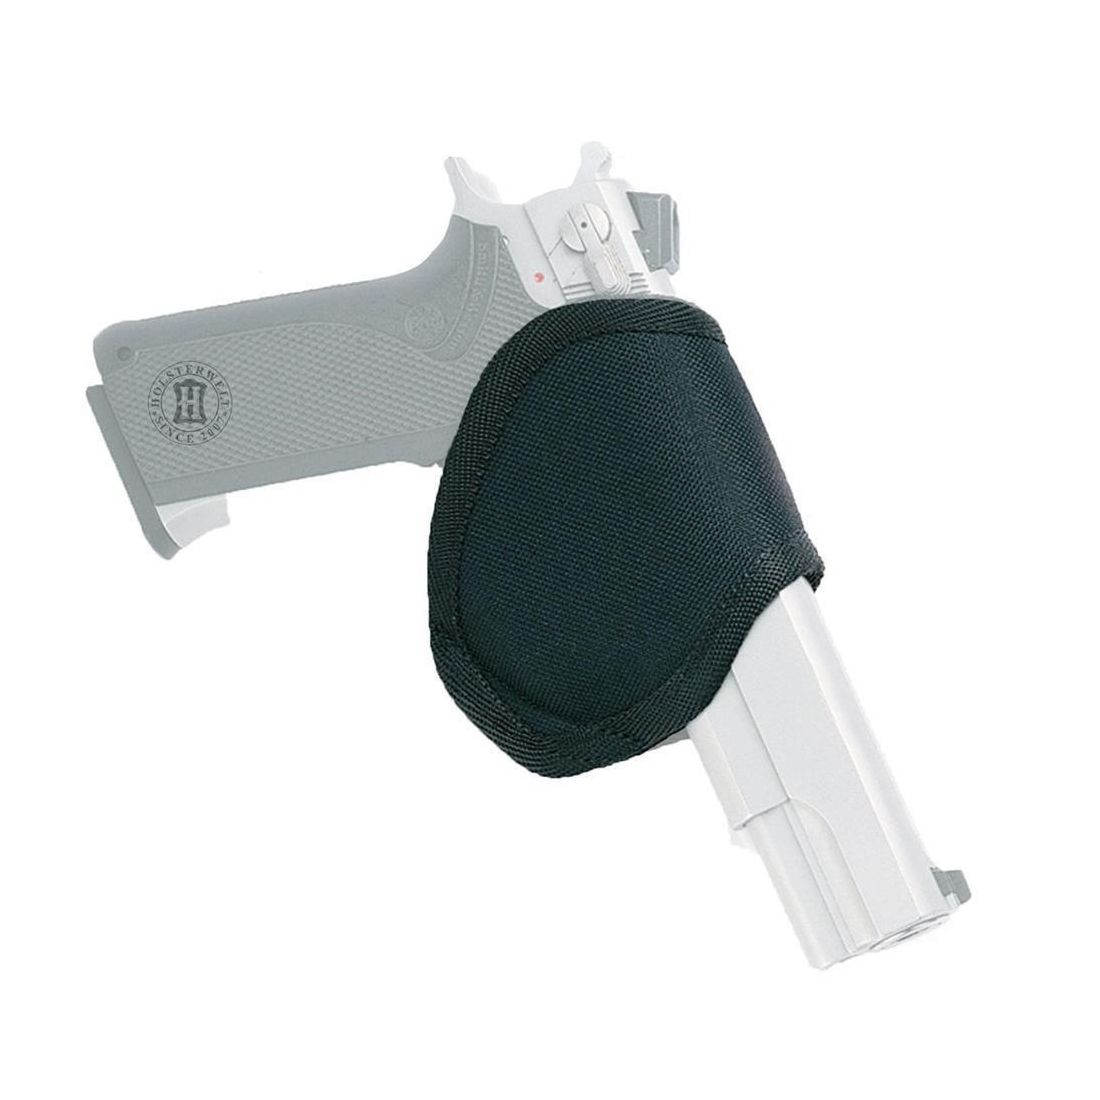 LOOP Holster Rechtshänder- CZ M 75/85/-Compact, S&W 3913, Walther P22/ P 88